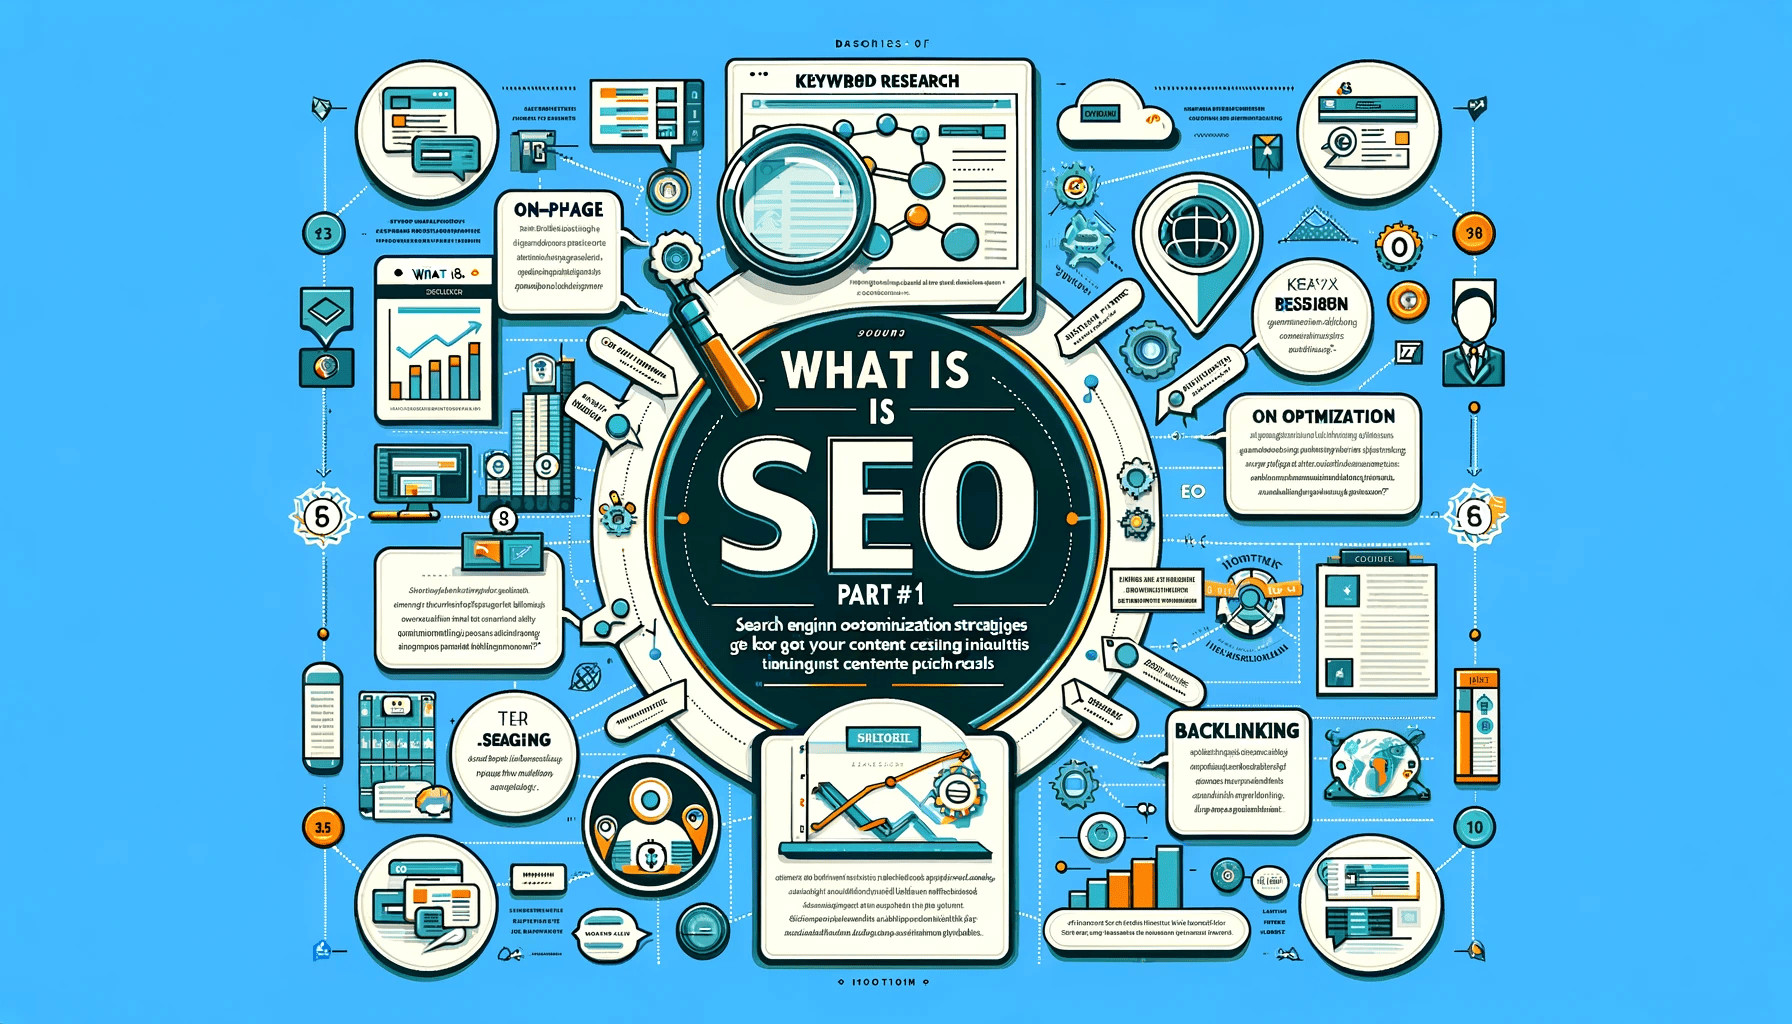 Foundation of SEO: Your Path to Search Engine Visibility